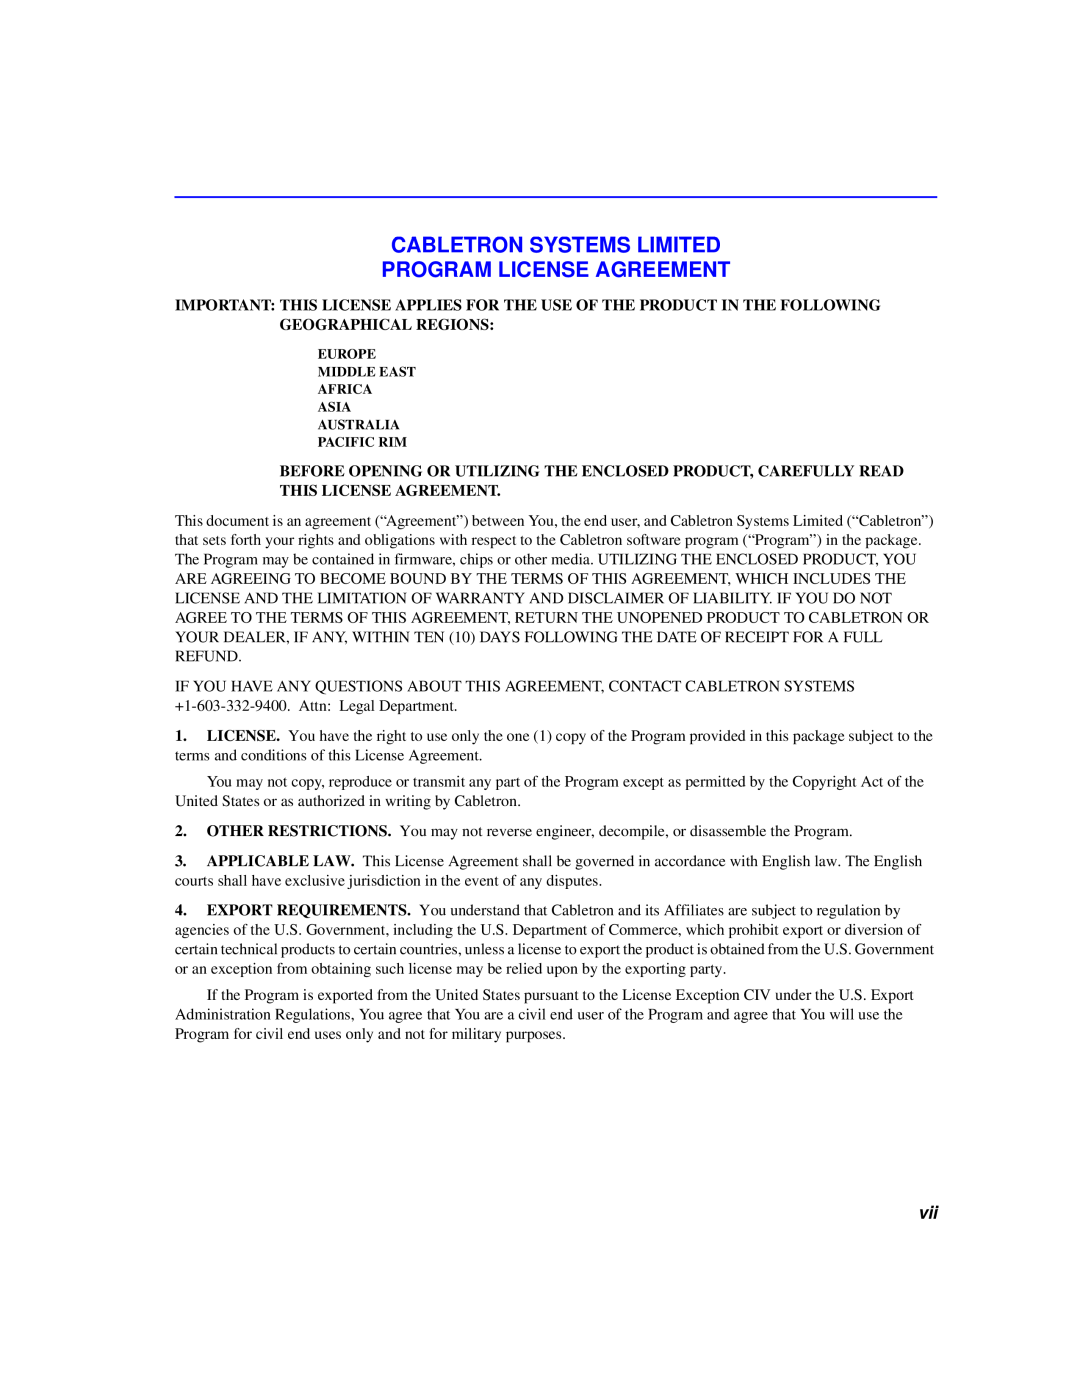 Cabletron Systems 6000 manual Cabletron Systems Limited Program License Agreement 